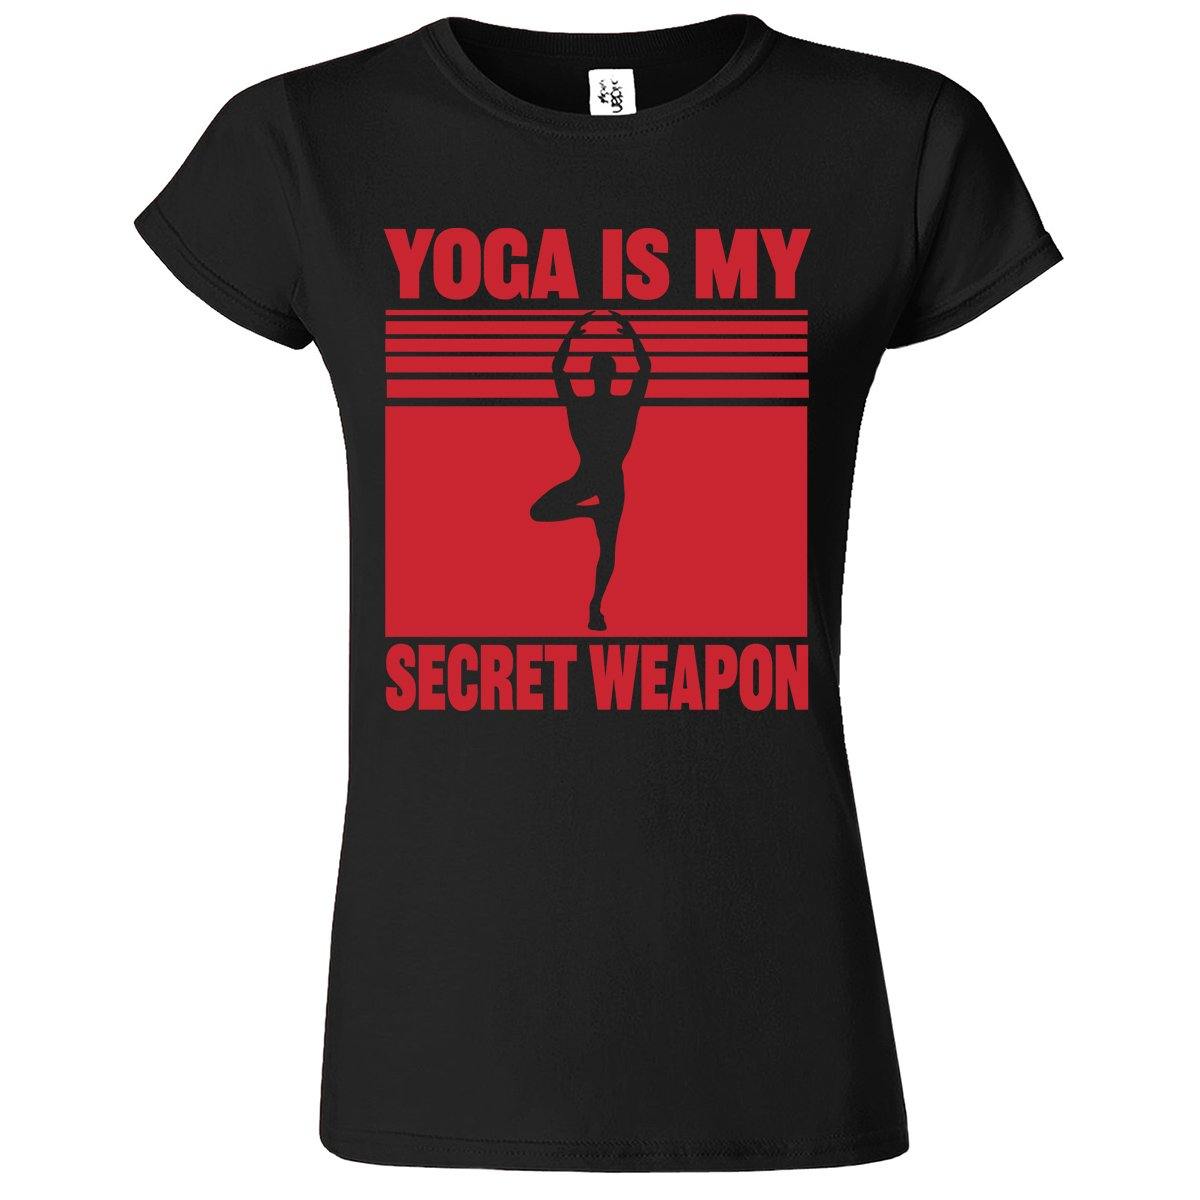 Yoga Is My Secret Weapon Printed T-Shirt for Women's - ApparelinClick